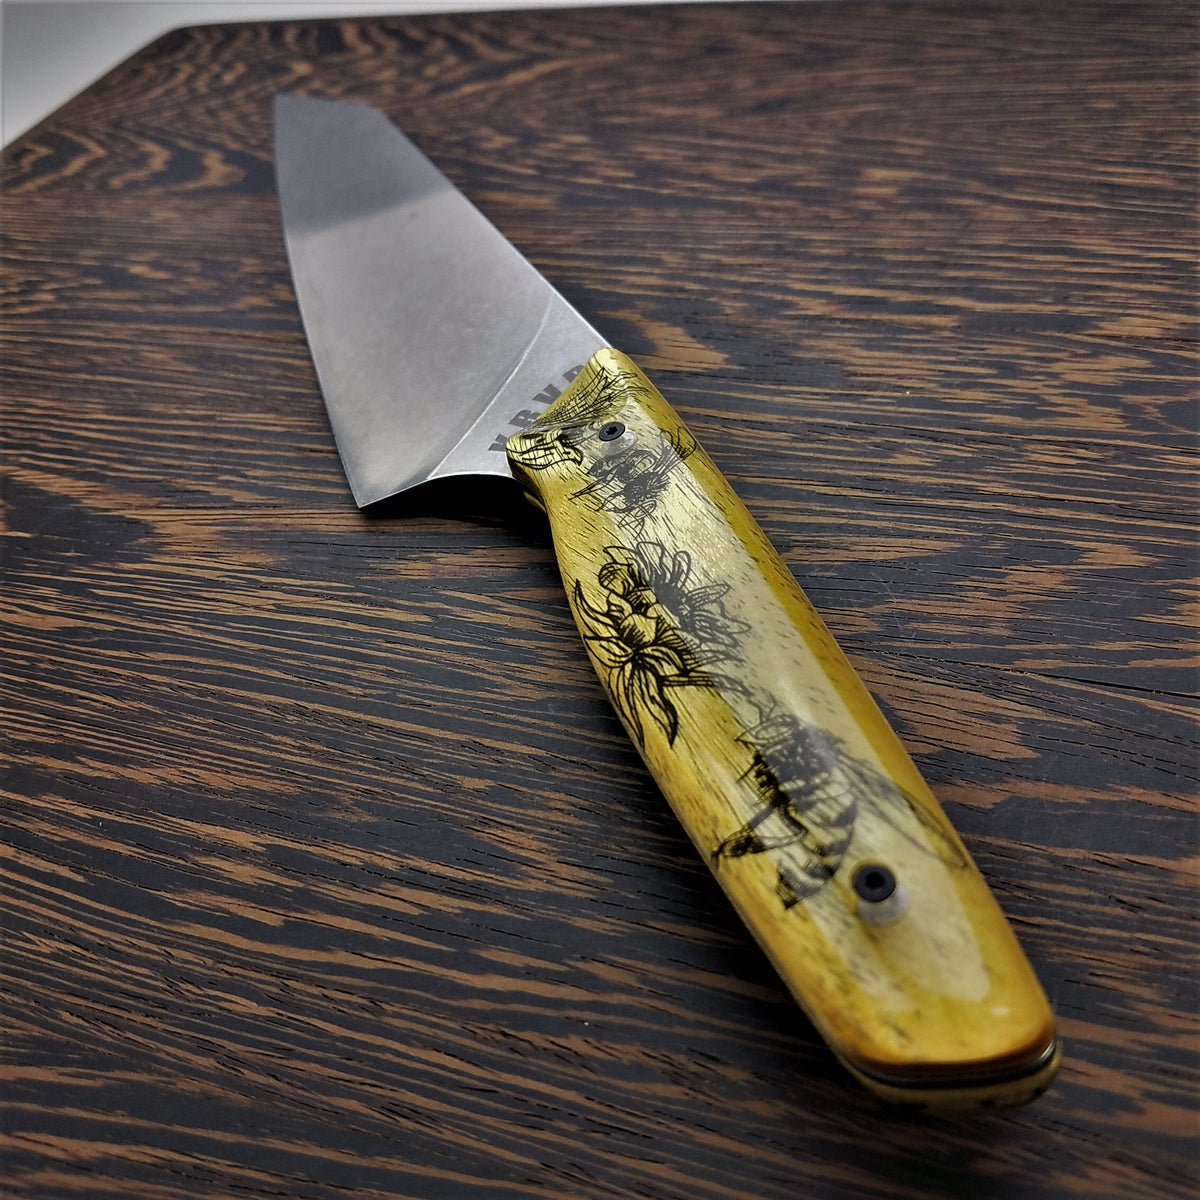 Queen Bee - 8in (203mm) Gyuto Chef Knife S35VN Stainless Steel